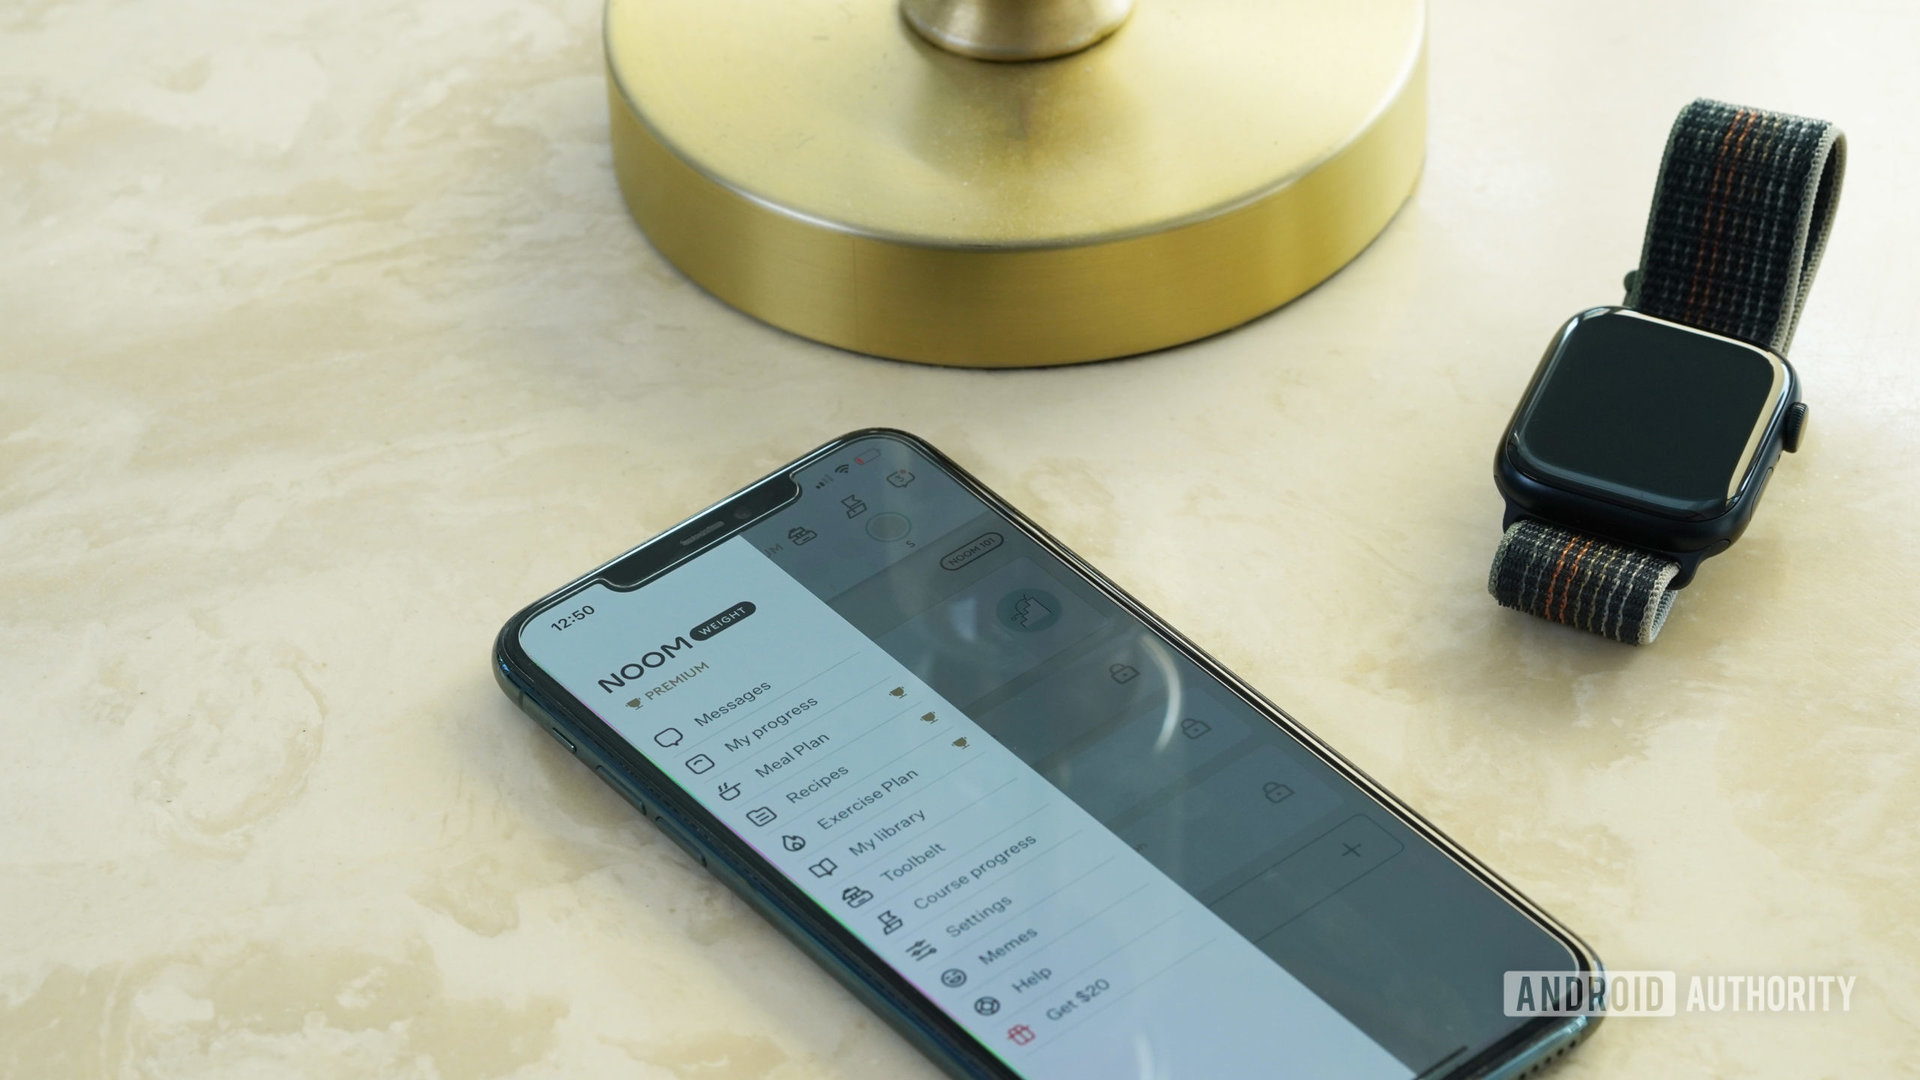 An iPhone 11 Pro resting on a marble table displays the Noom app.